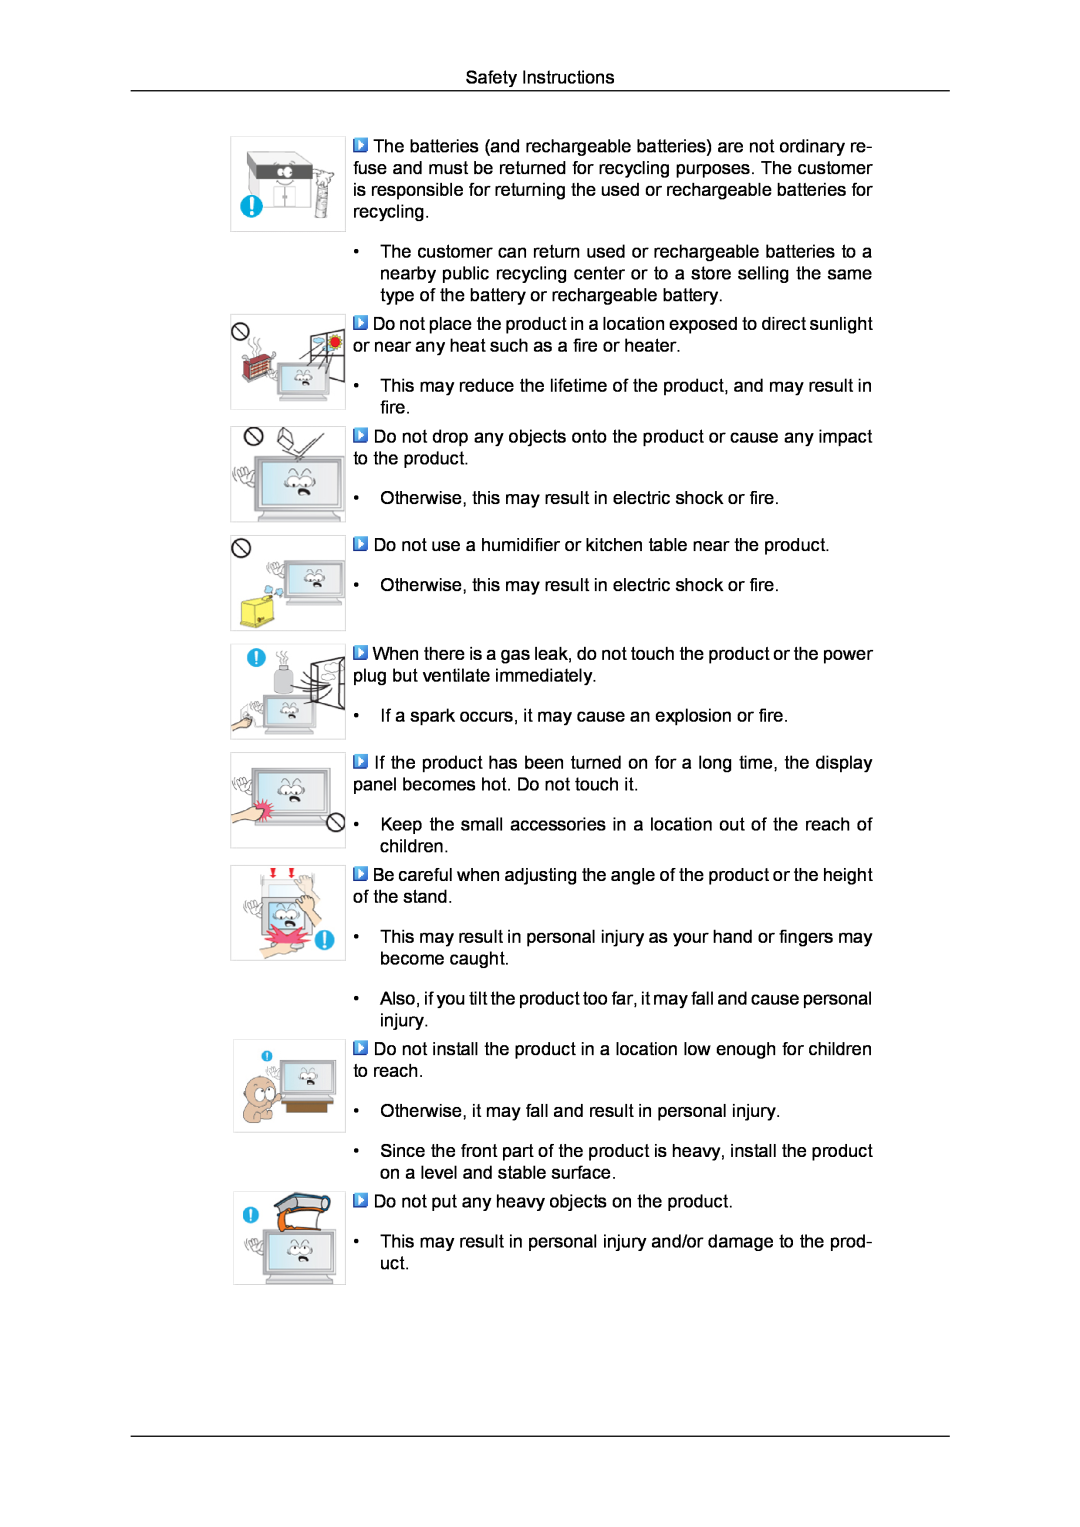 Samsung LH40MGULBC/ZB manual Safety Instructions, This may reduce the lifetime of the product, and may result in fire 